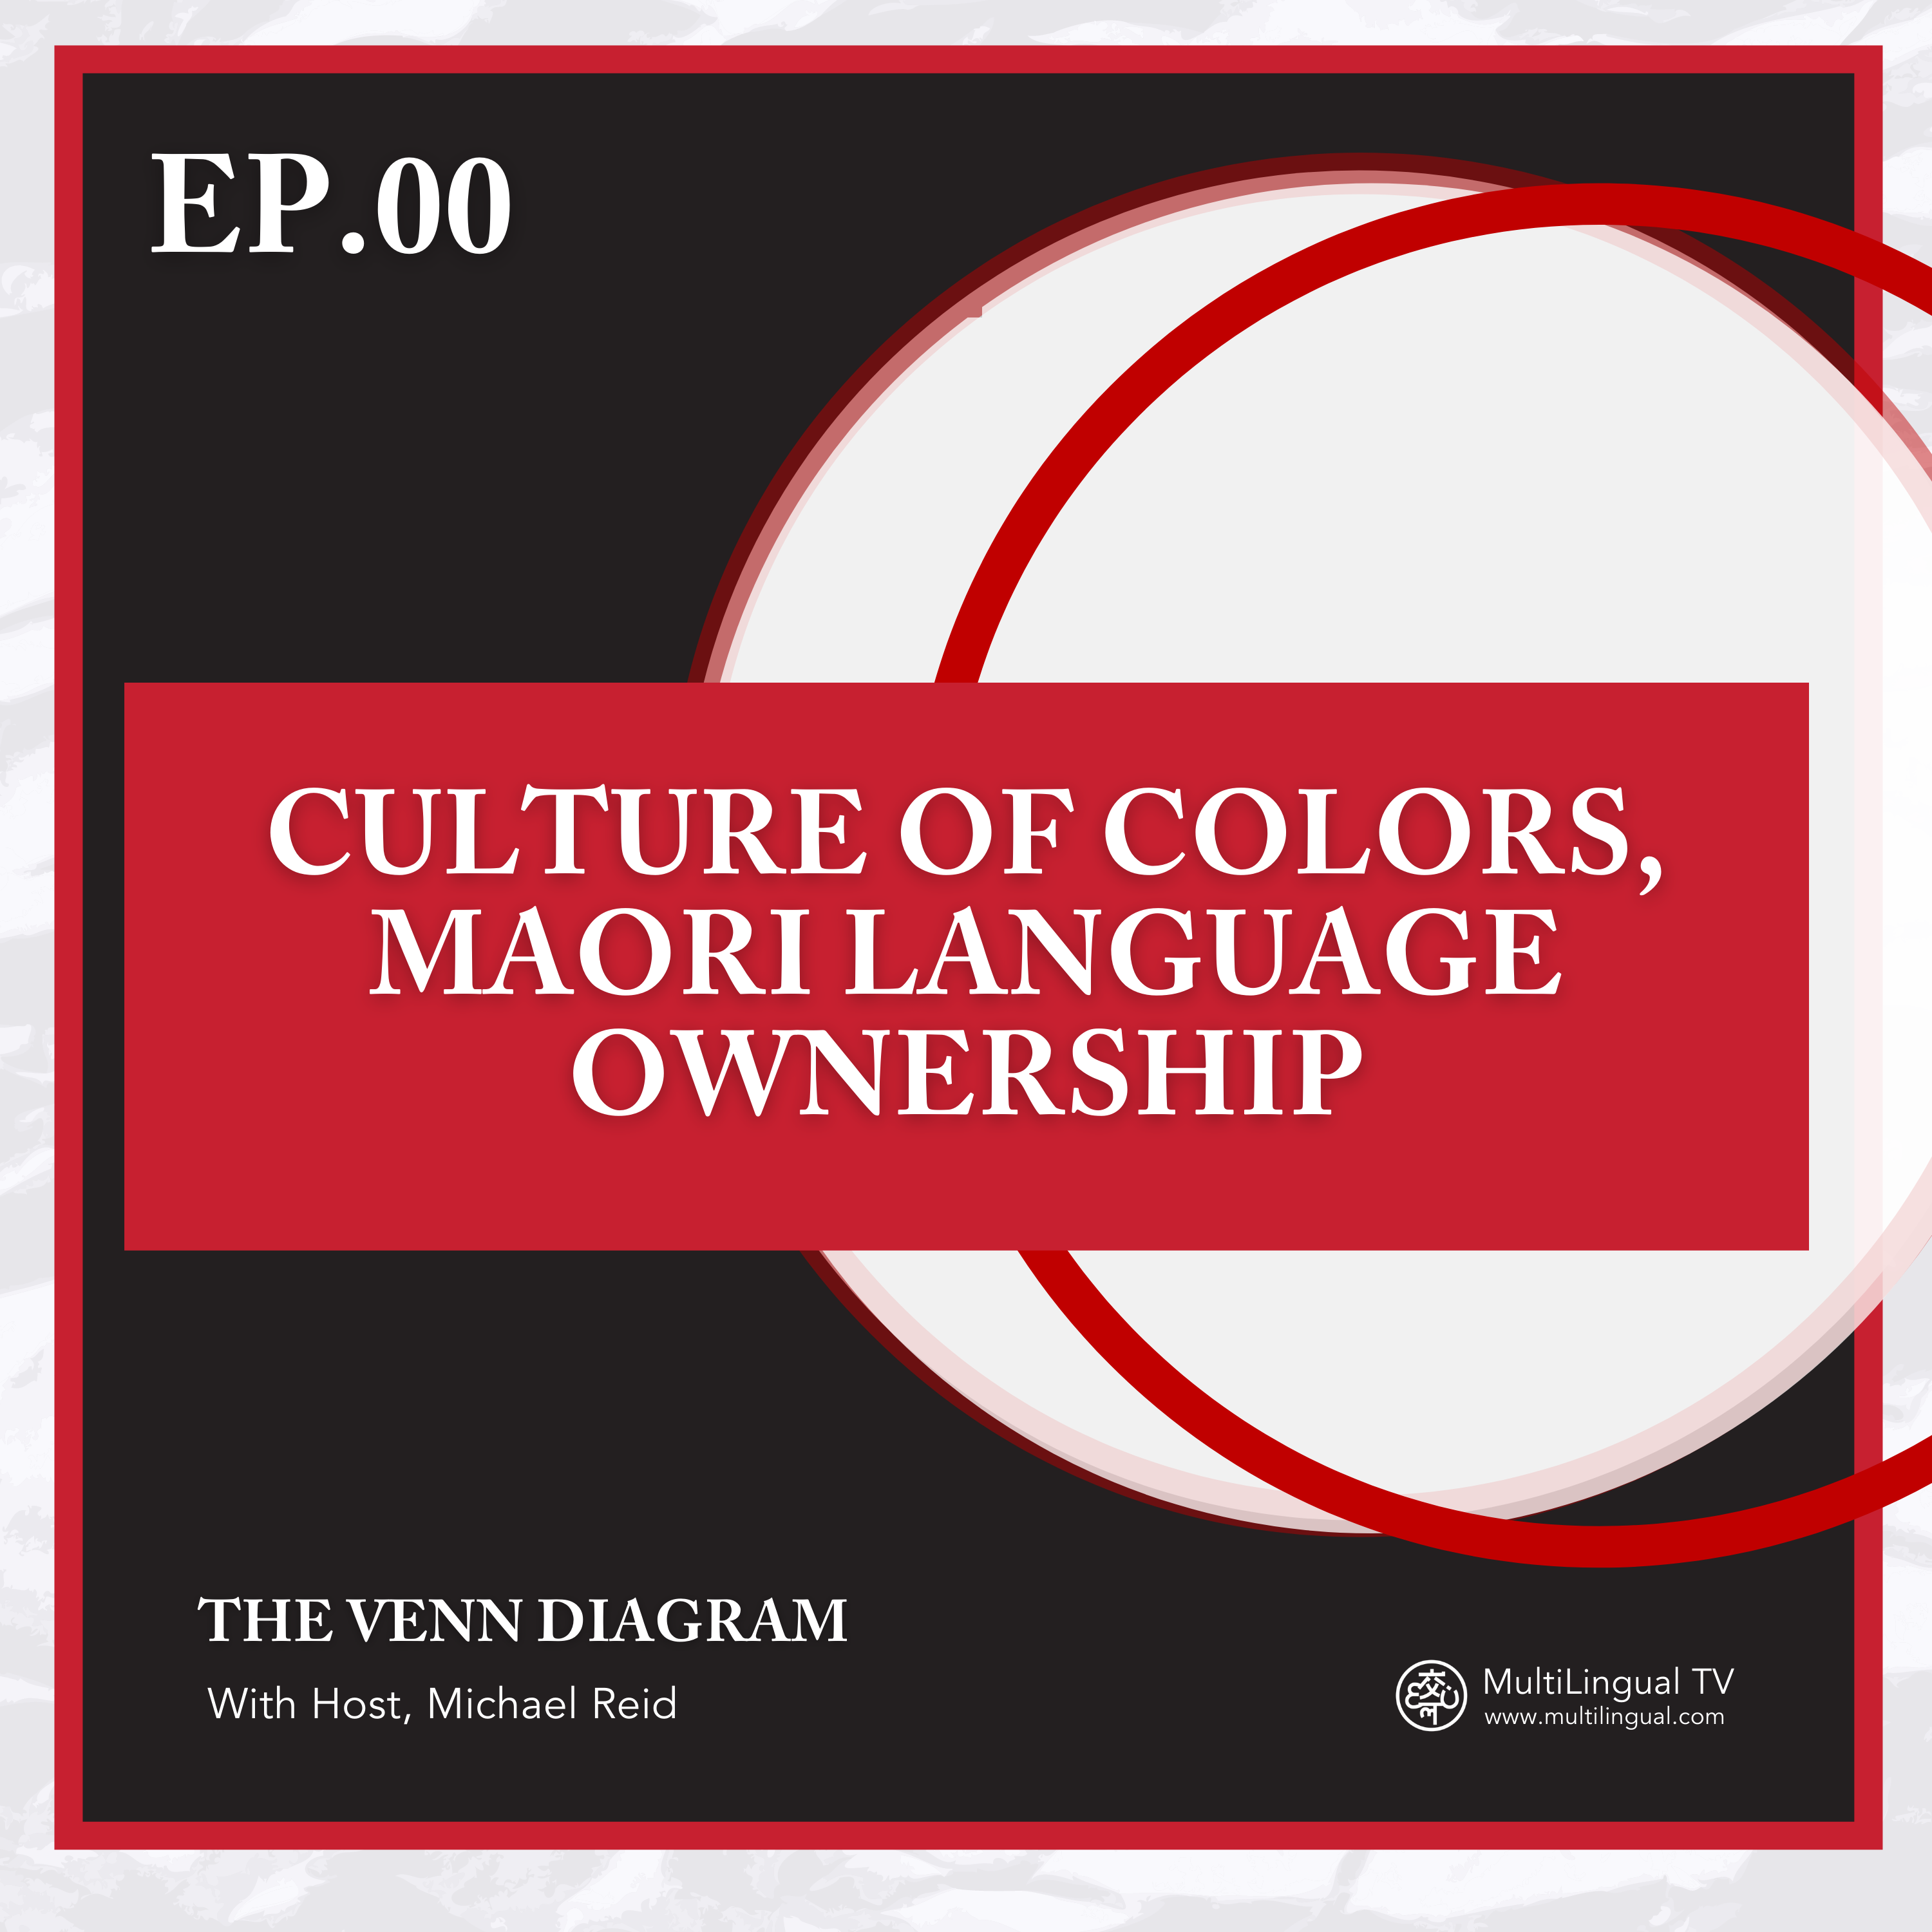 Culture of Colors, Maori Language Ownership, and More (Pilot)